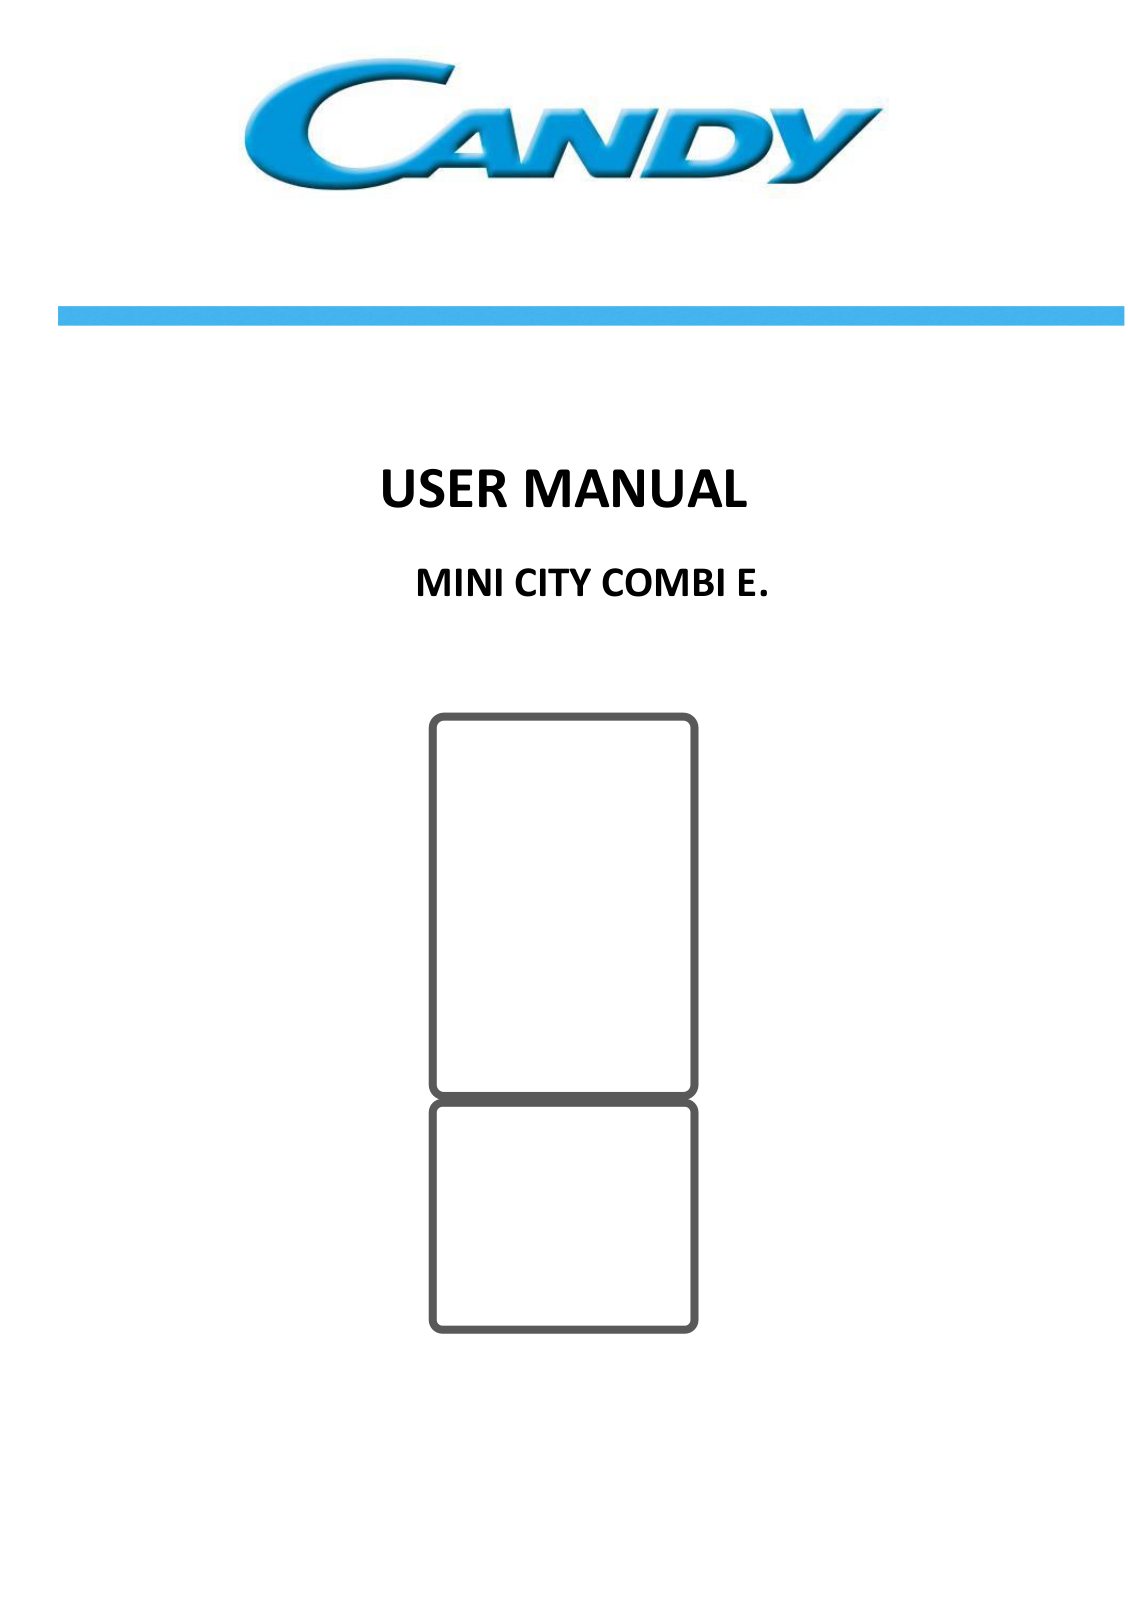 CANDY CMCL 5142W, CMCL 5144X, CMCL 5172X, CMCL 5174X User Manual